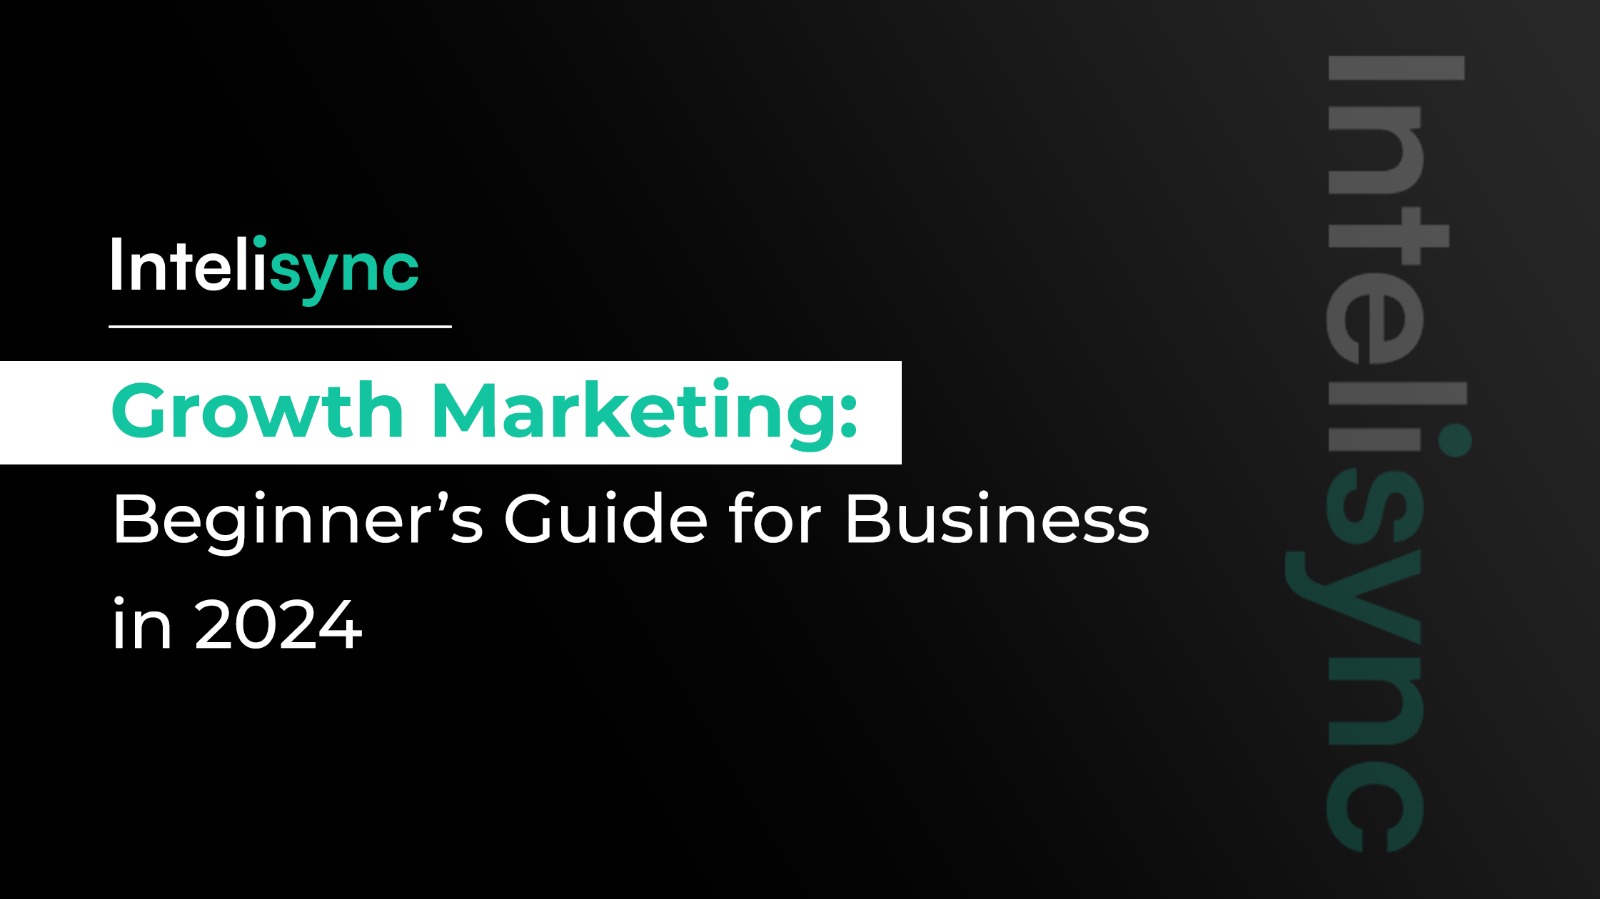 Growth Marketing: Beginner’s Guide for Business in 2024